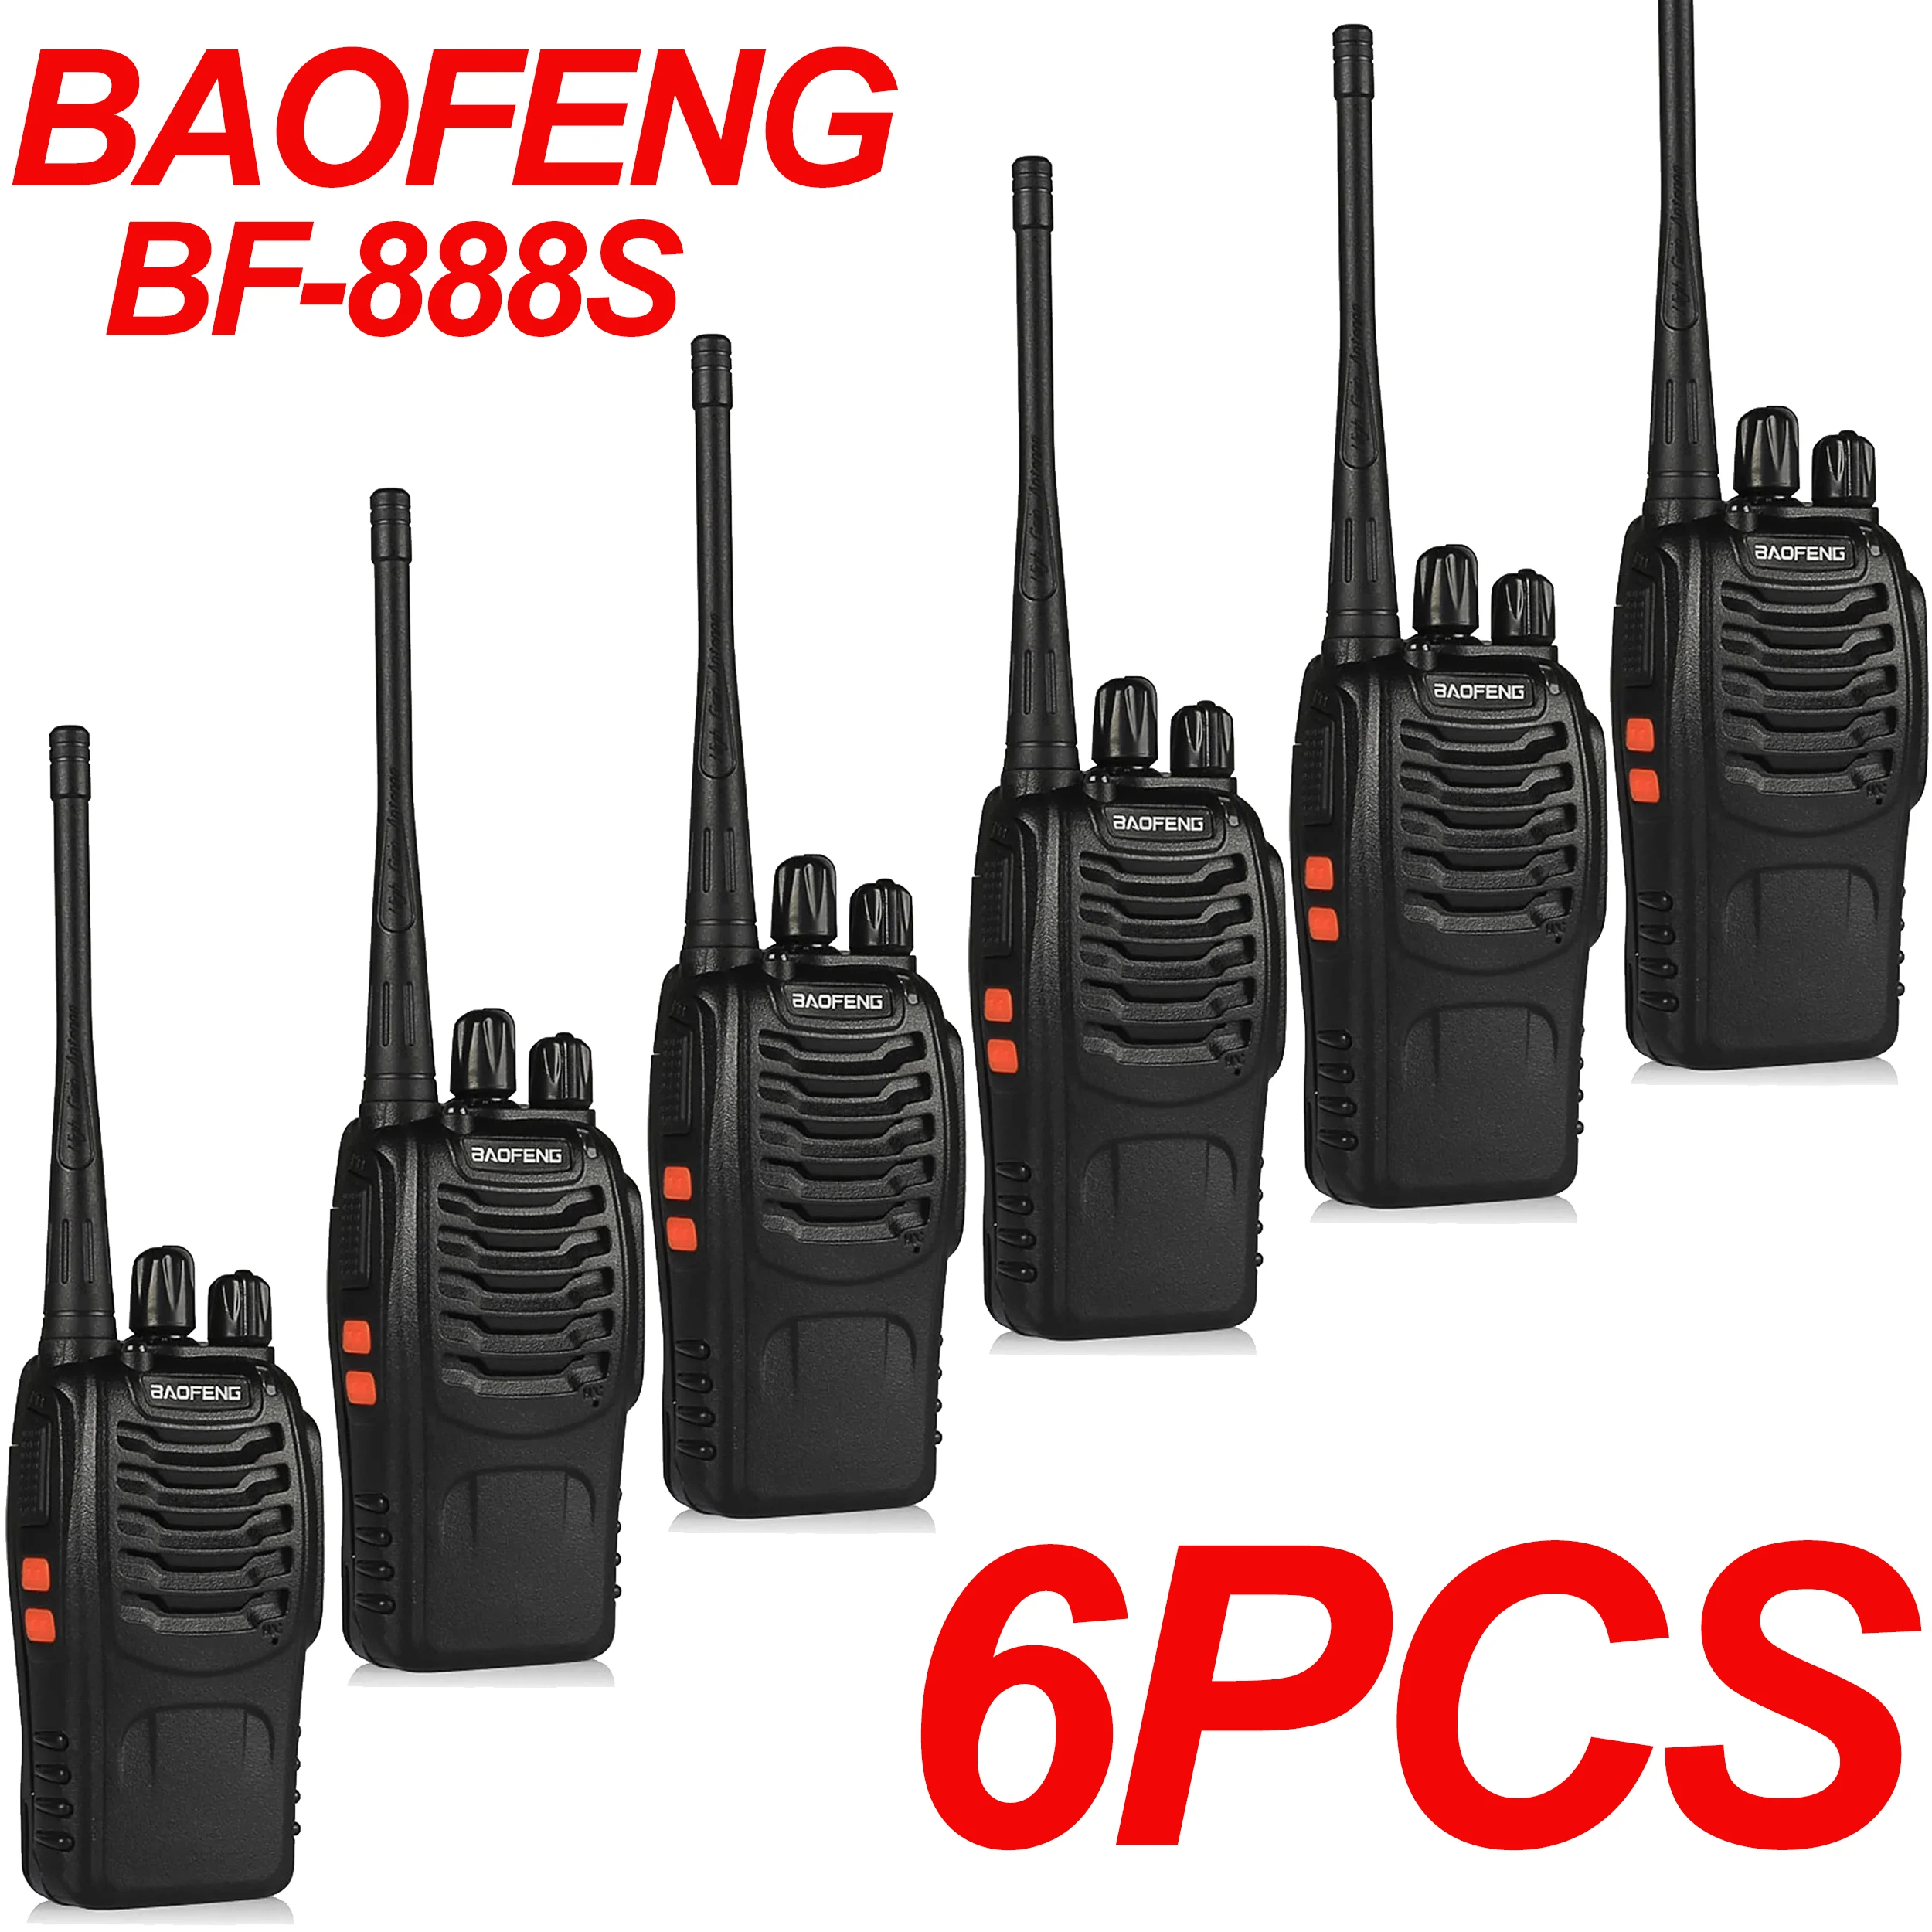 6PCS Baofeng BF-888S Walkie Talkie 888s UHF 5W 400-470MHz BF888s BF 888S  H777 Long Range Two Way Radio For hunting hotel AliExpress